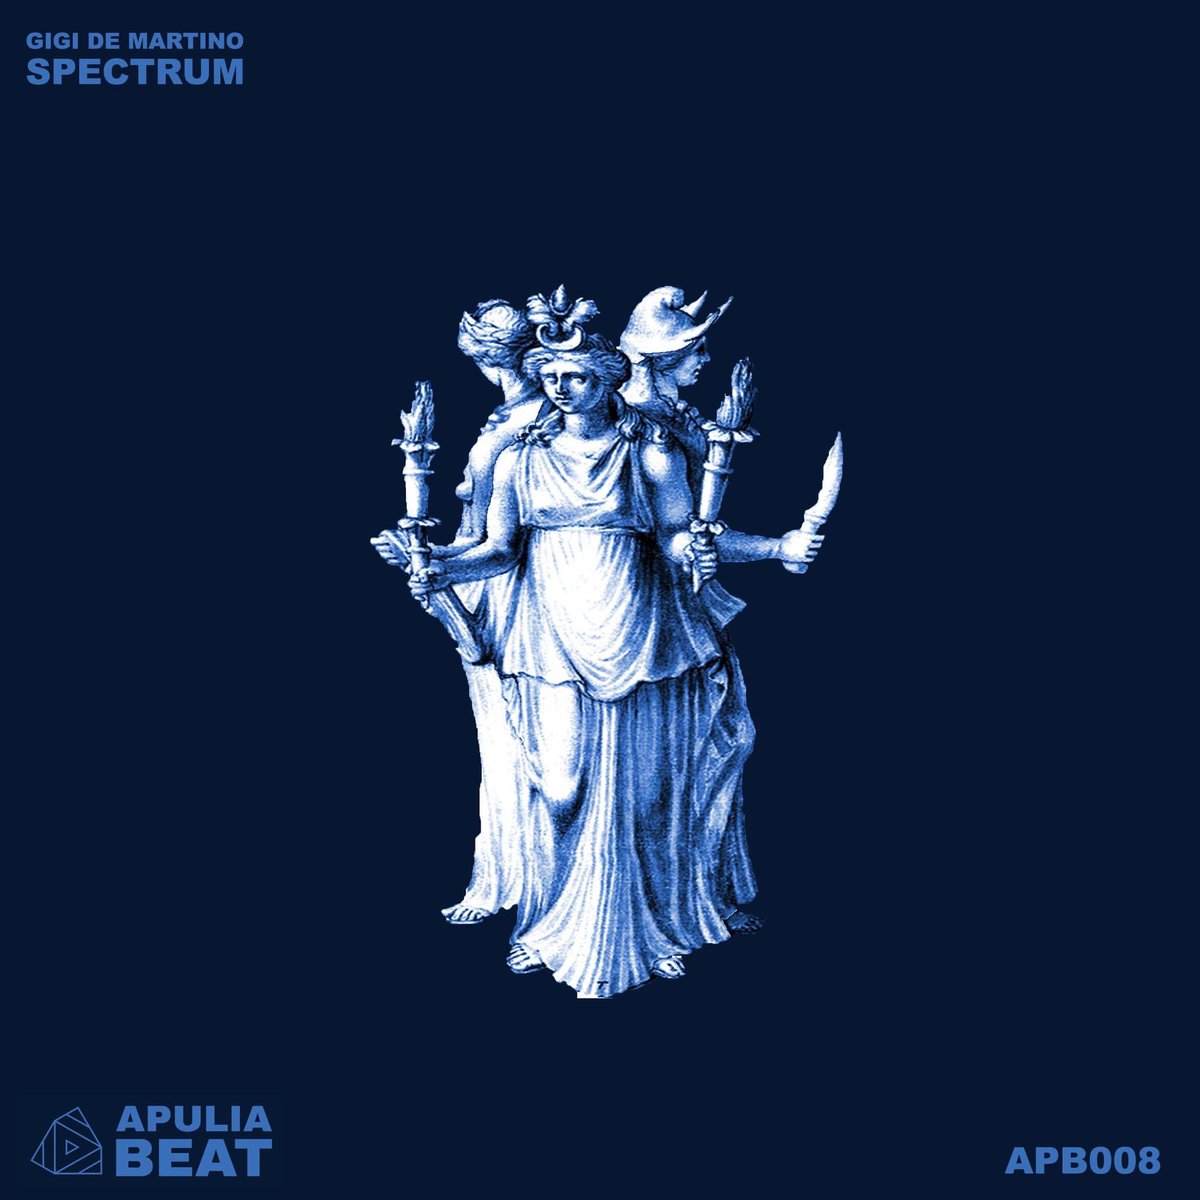 The new Apulia Beat 008 is on its way!
@GigideMartino, returns to Apulia Beat, presenting his first release 'Spectrum' which takes you on a journey dreamy featuring edgy synths with energetic melodic lines and a strong hard techno groove.

Release date: 30/09/22

#hardtechno